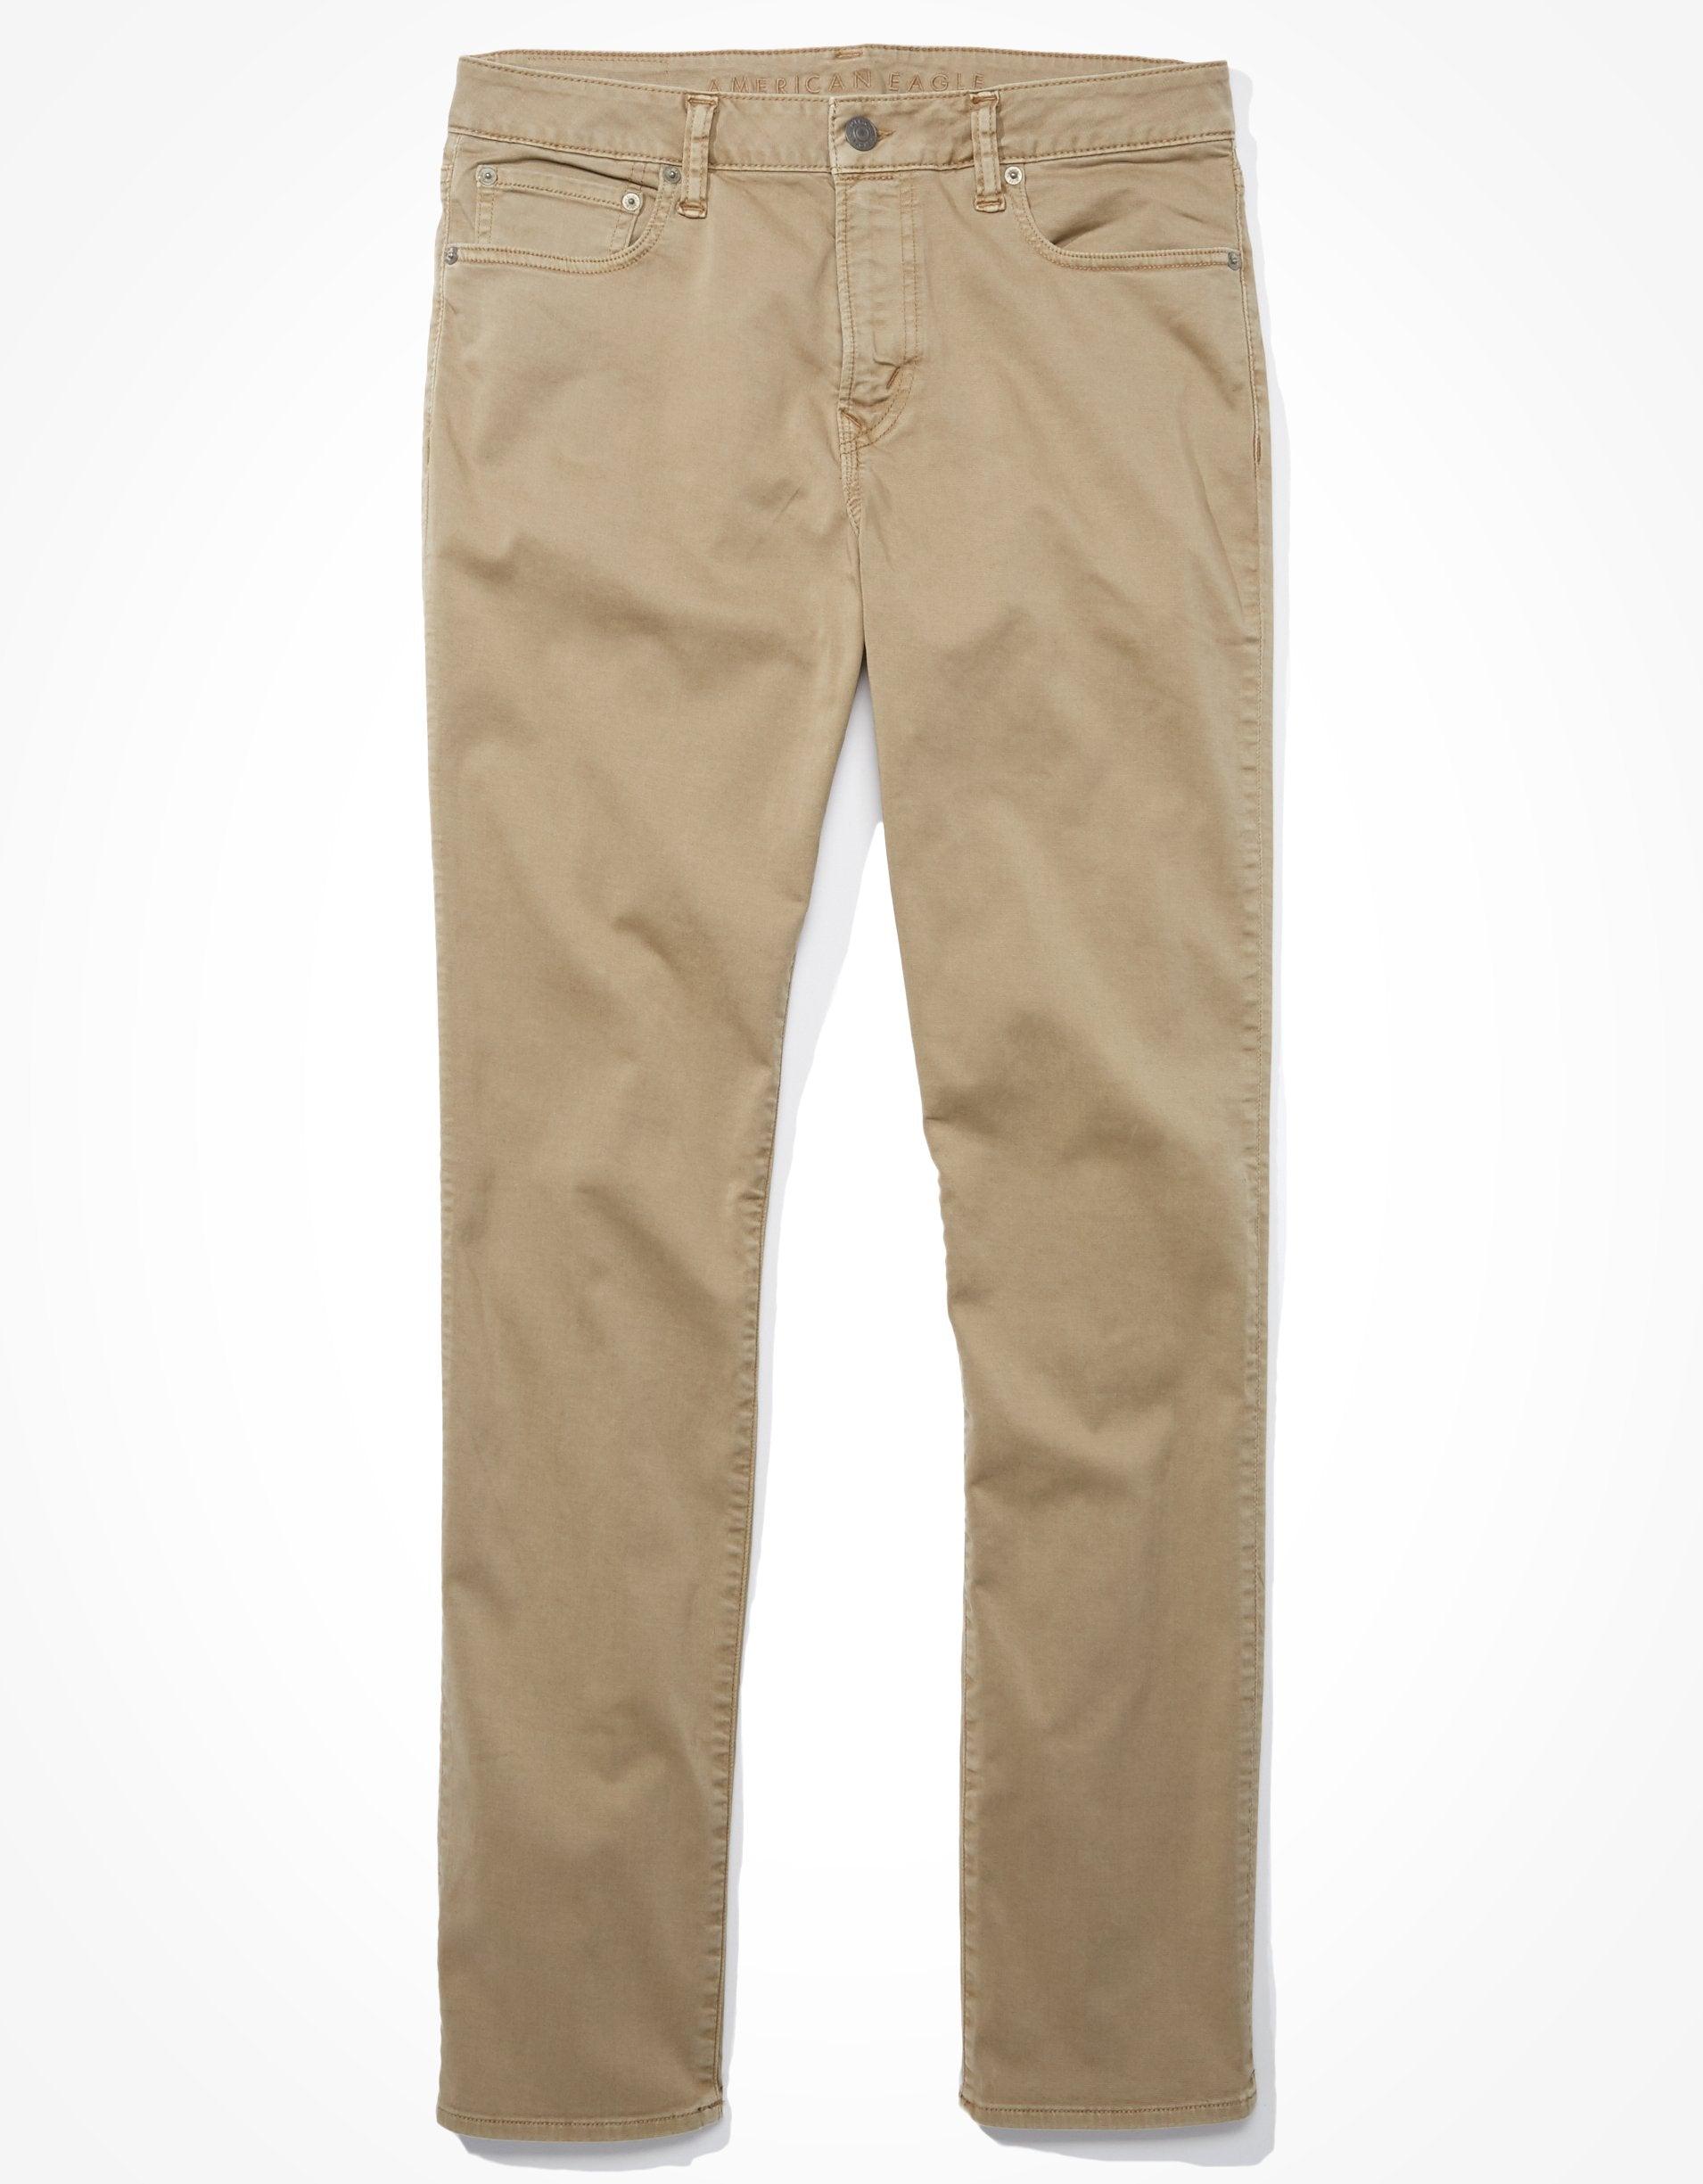 Buy AE Stretch Kick Bootcut Pant online | American Eagle Outfitters Qatar